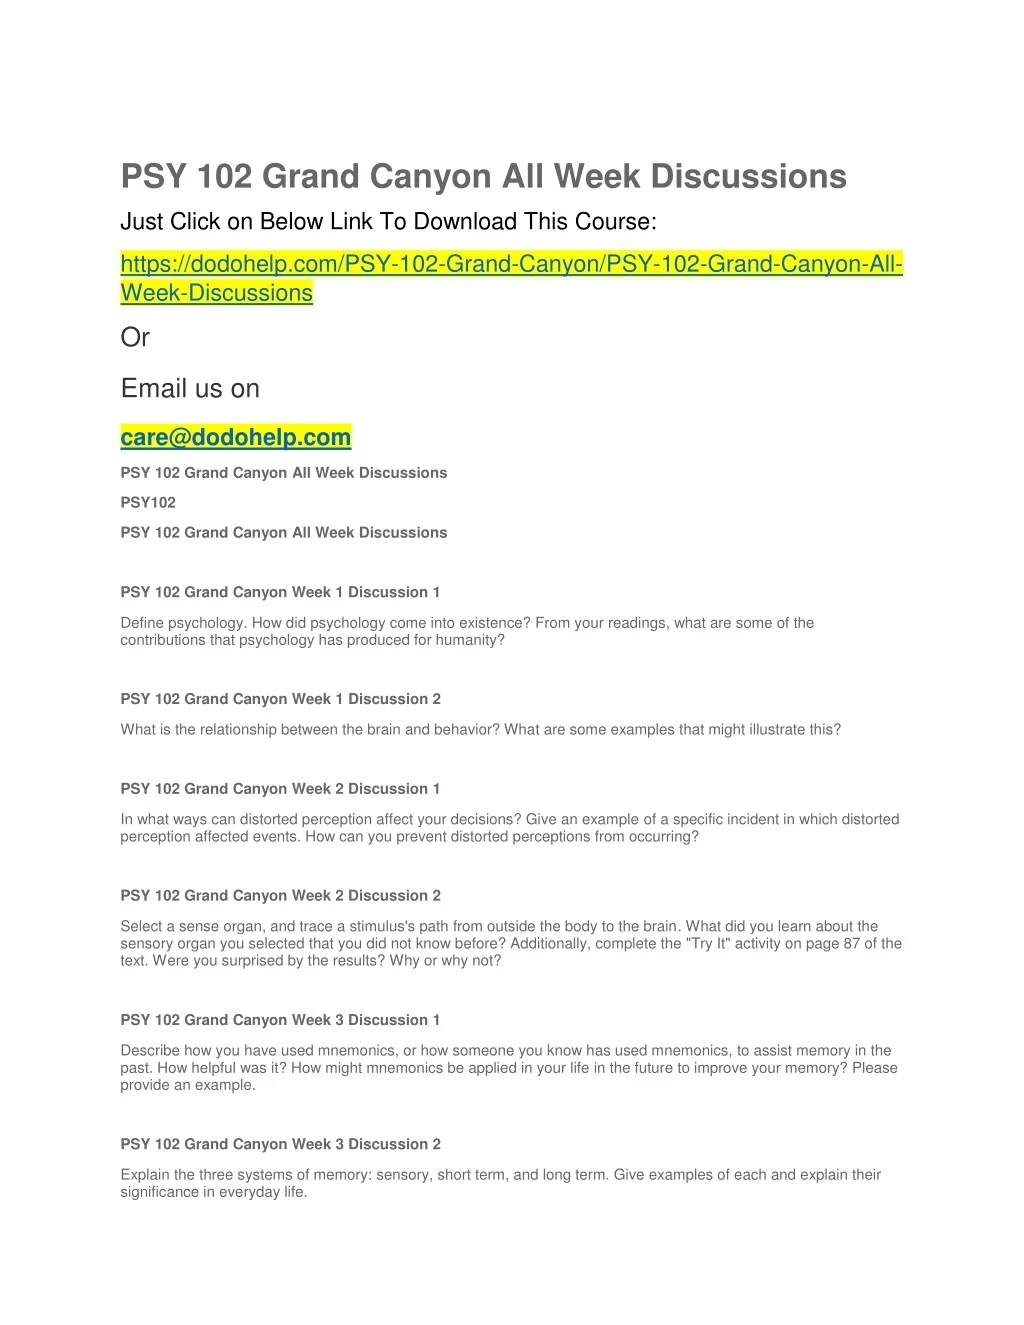 psy 102 grand canyon all week discussions just